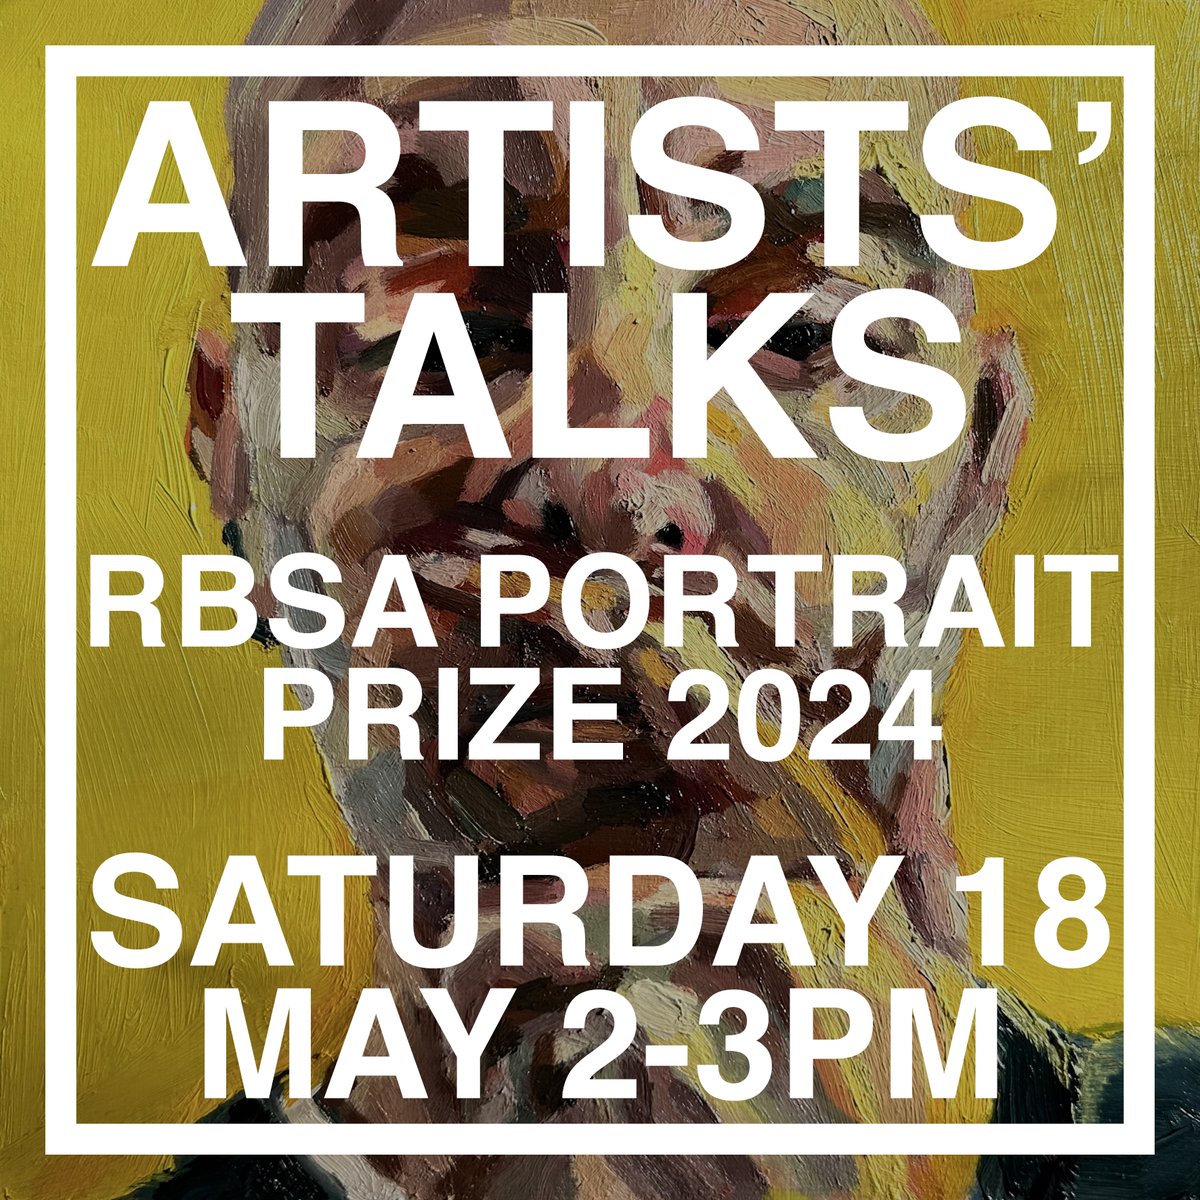 Visit the Gallery from 2pm tomorrow for the chance to hear from some of the artists exhibiting in the RBSA Portrait Prize 2024. Speakers will give an insight into their practice and artistic process before taking questions from our visitors. See you tomorrow!